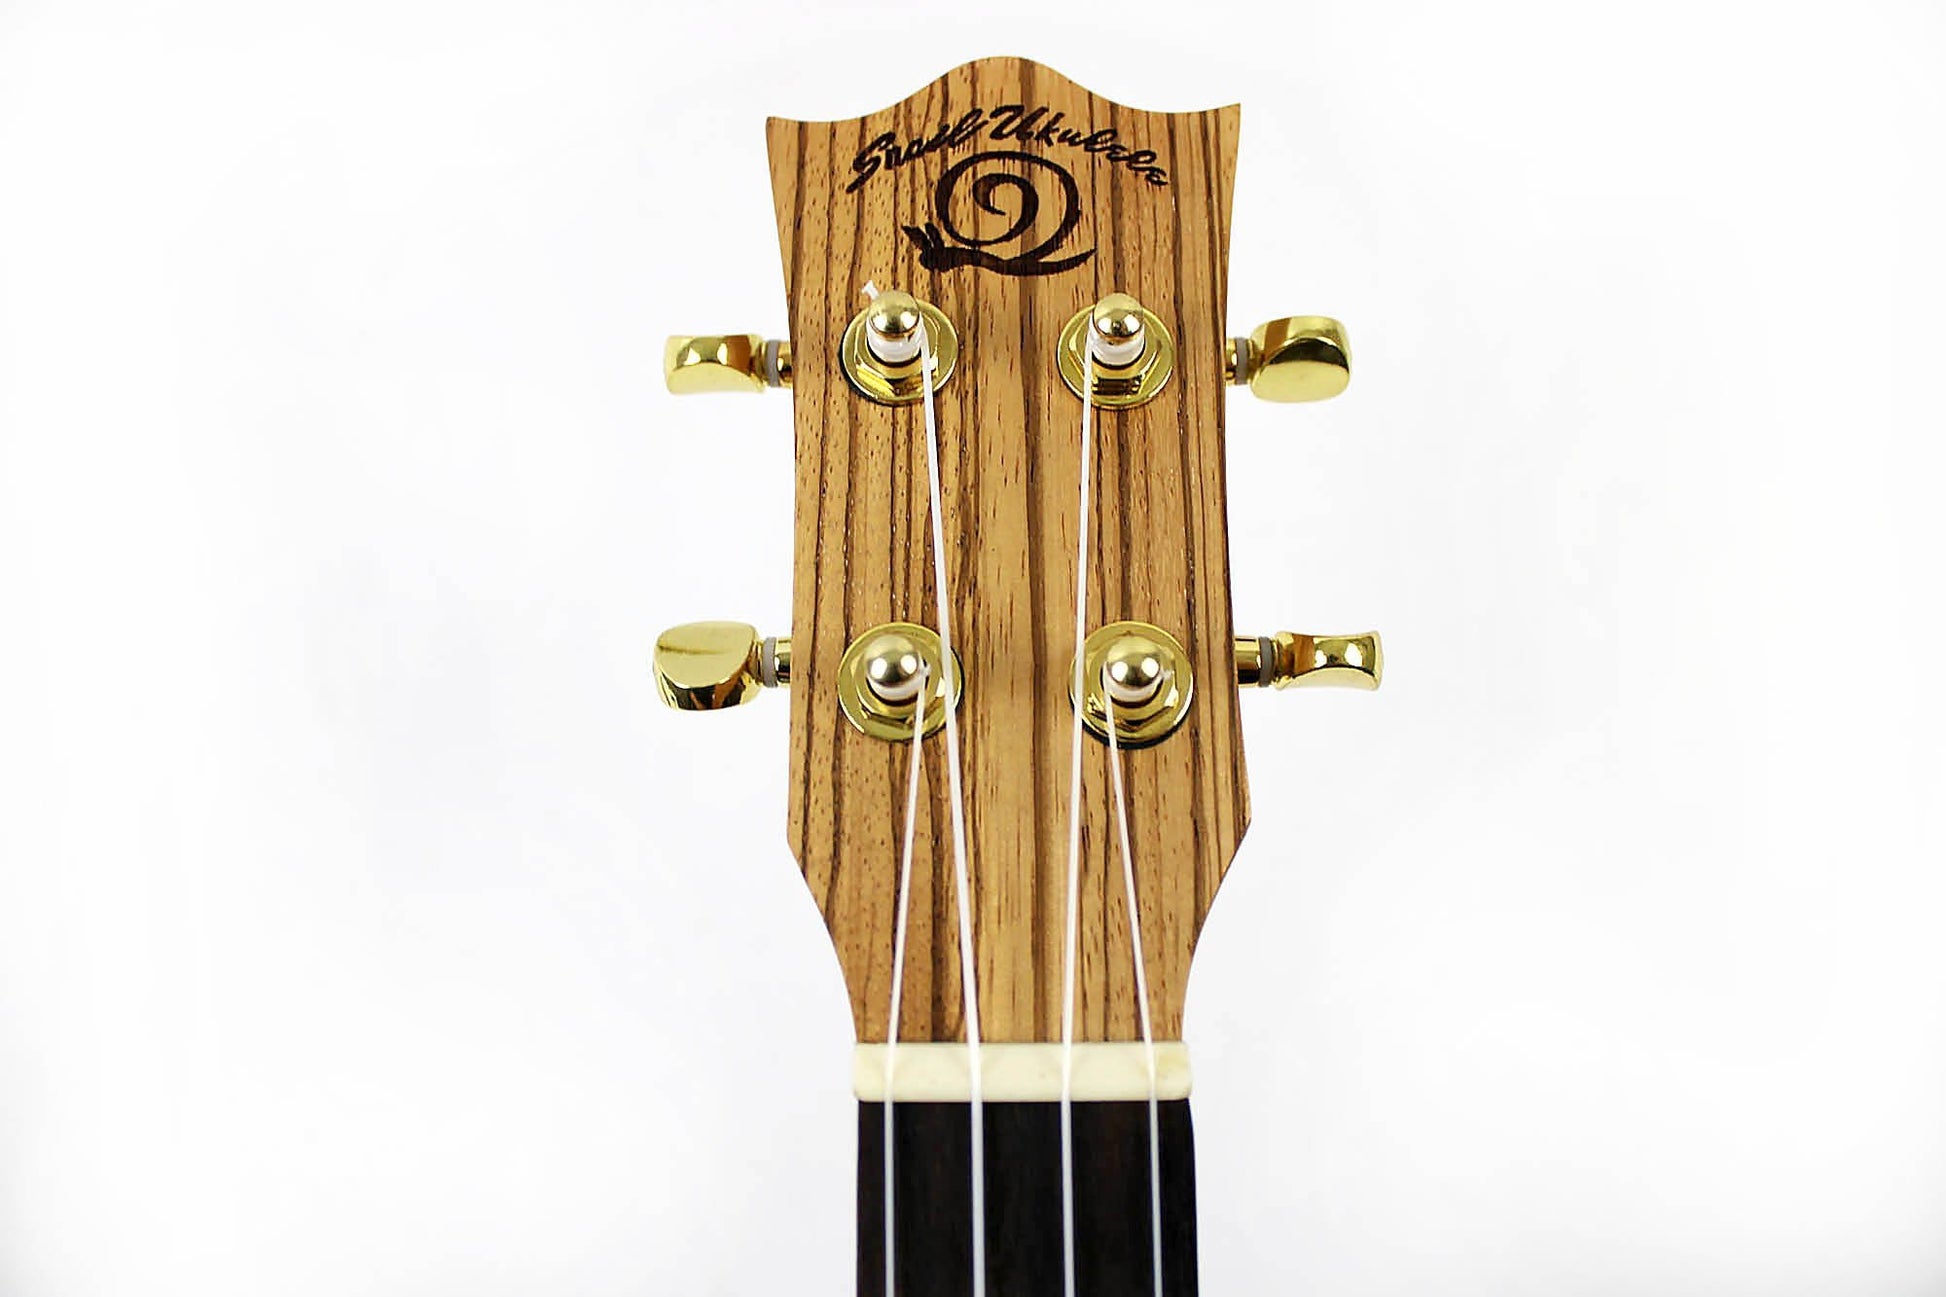 This is the front of the headstock of a Snail SNAILZEBUKT Zebrawood Tenor Ukulele.